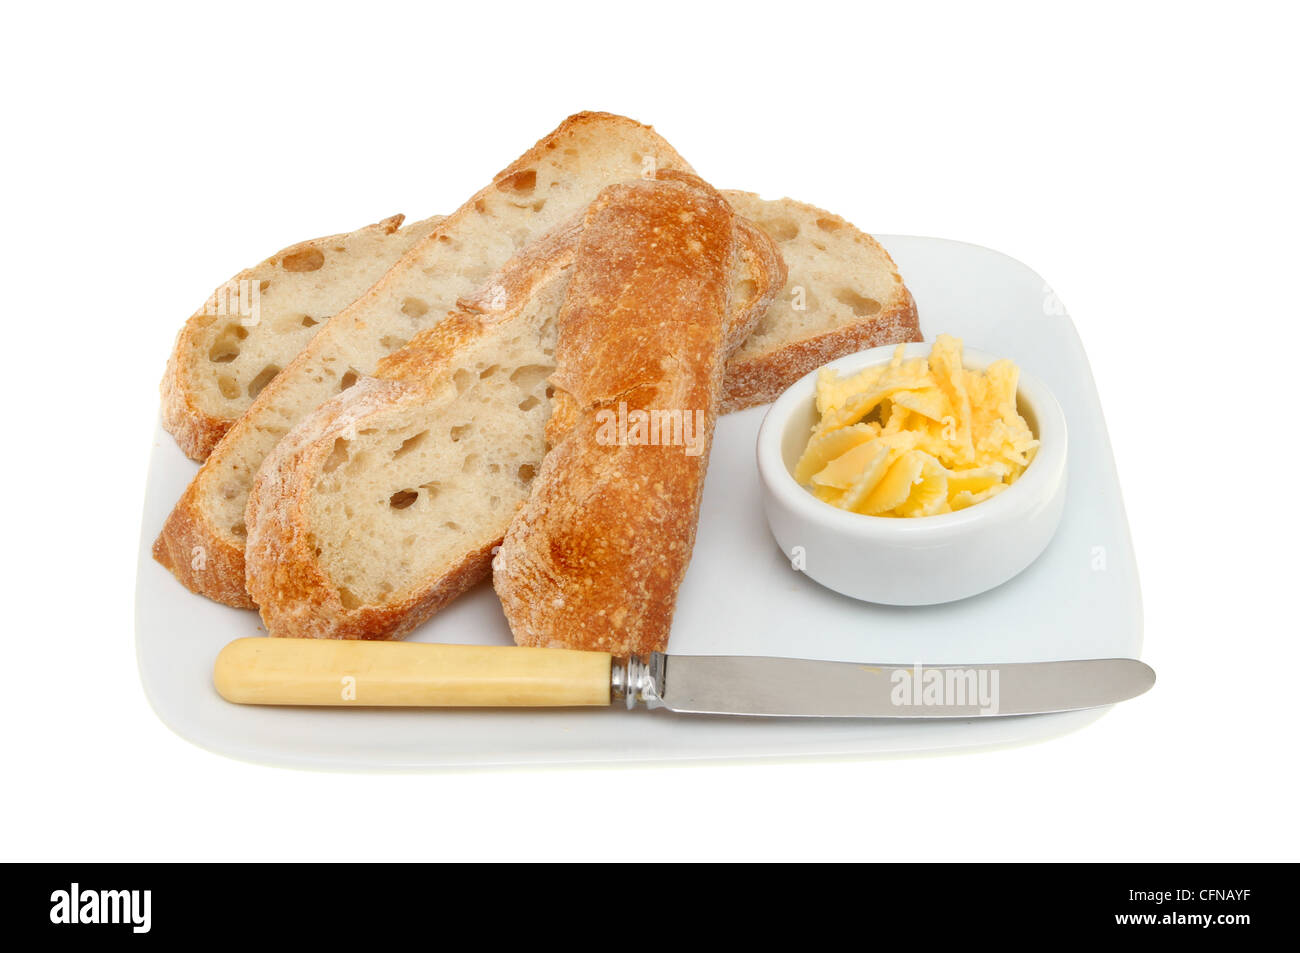 https://c8.alamy.com/comp/CFNAYF/slices-of-rustic-bread-on-a-plate-with-butter-and-a-knife-isolated-CFNAYF.jpg